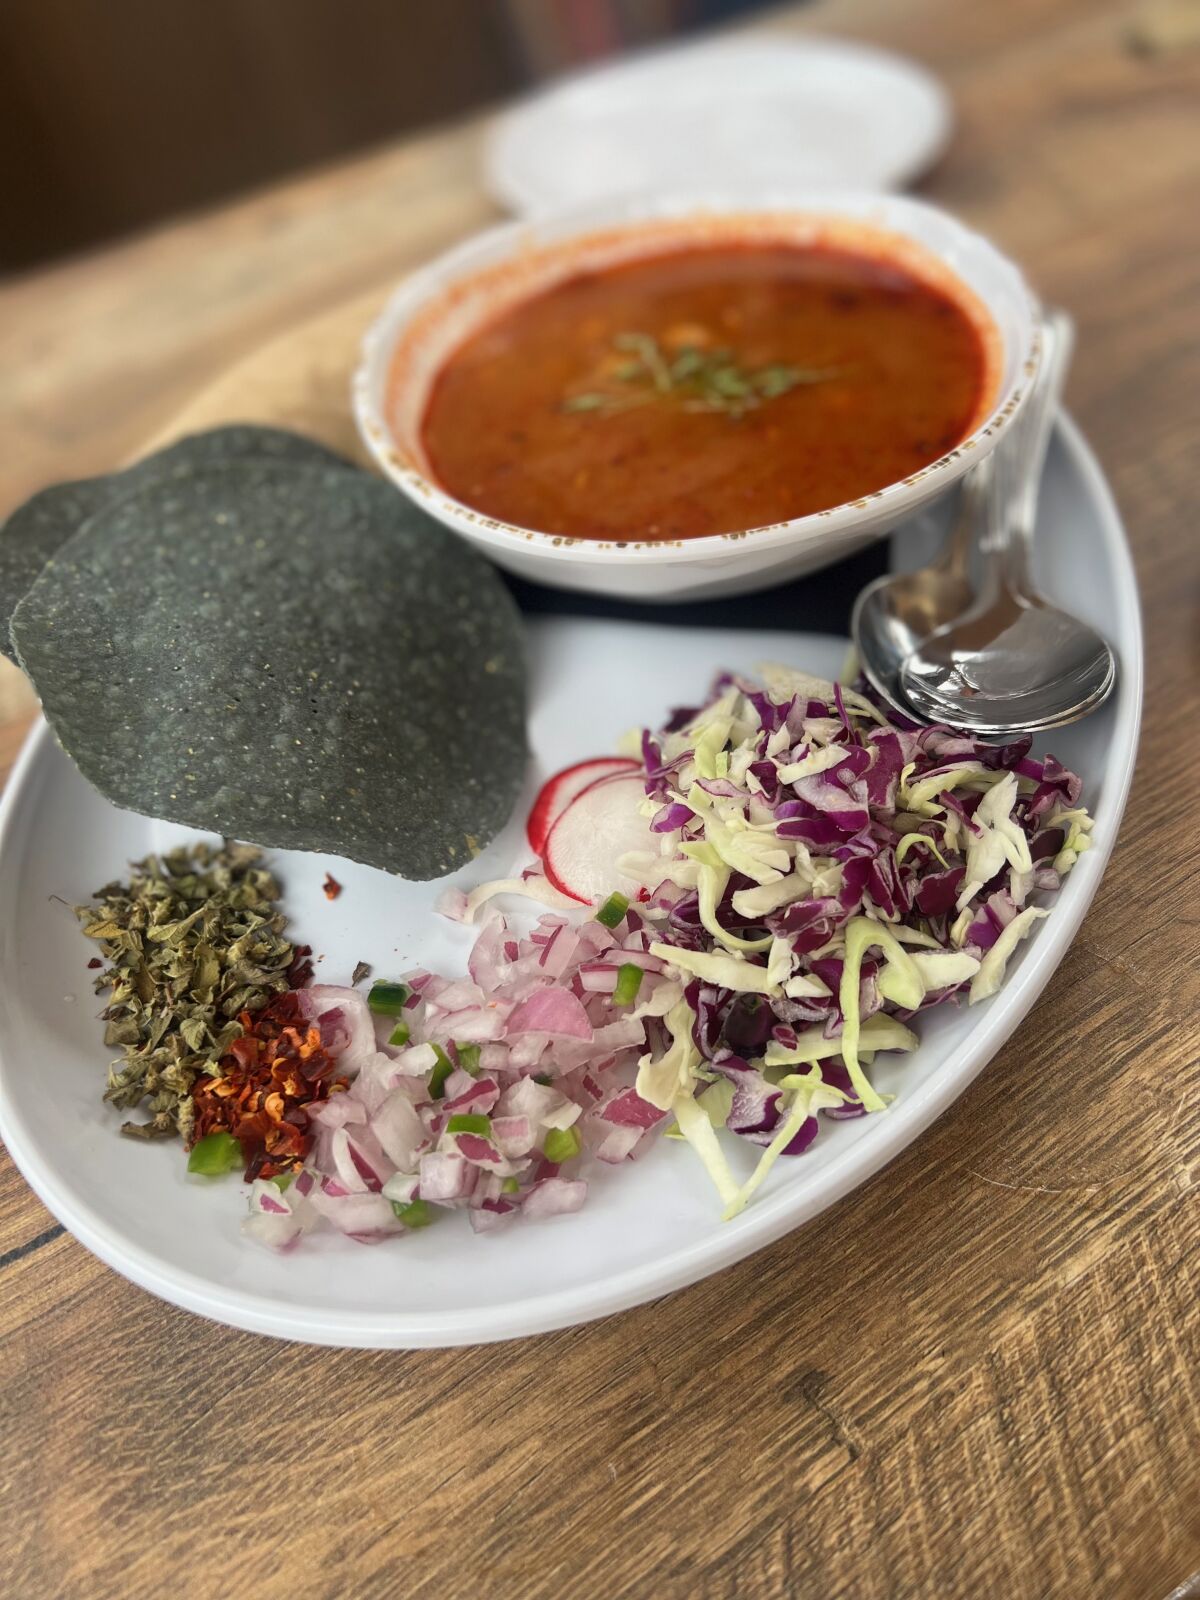 Pollo Pozole Rojo is one of the build-your-own dishes on the menu at newly opened La Cocina Mesa in Carlsbad.